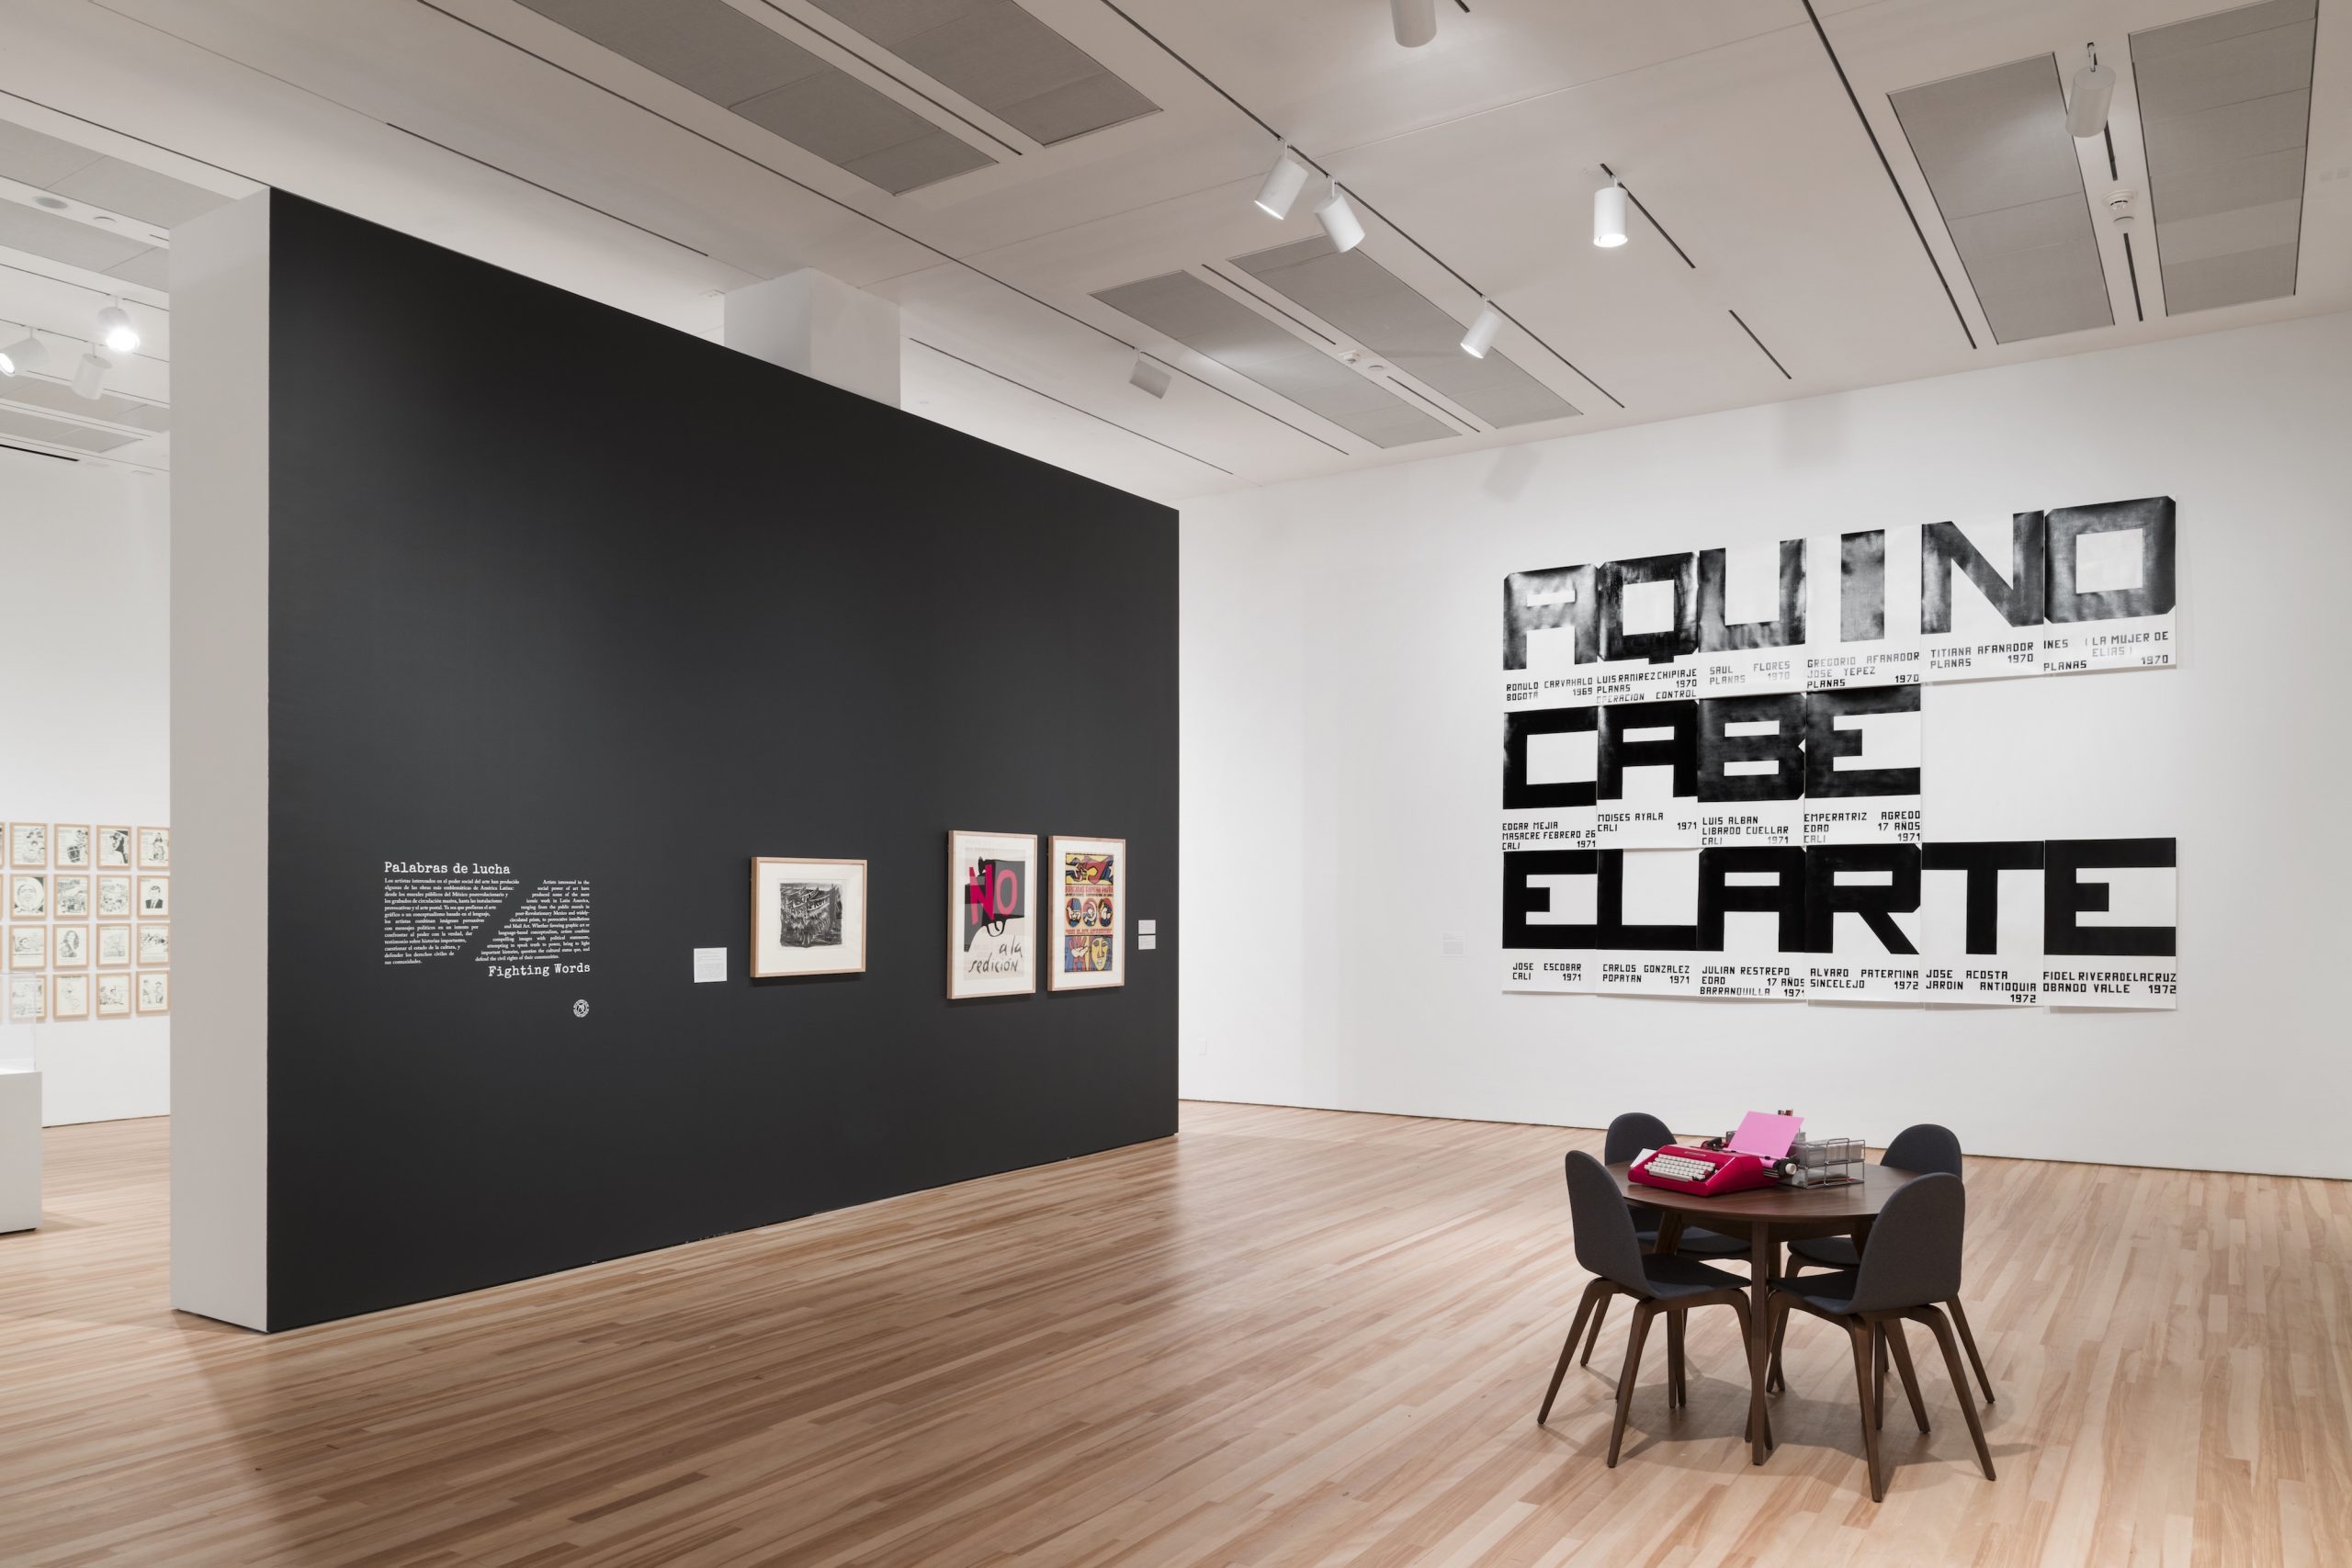 Exhibition view from Words/Matter: Latin American Art and Language at the Blanton